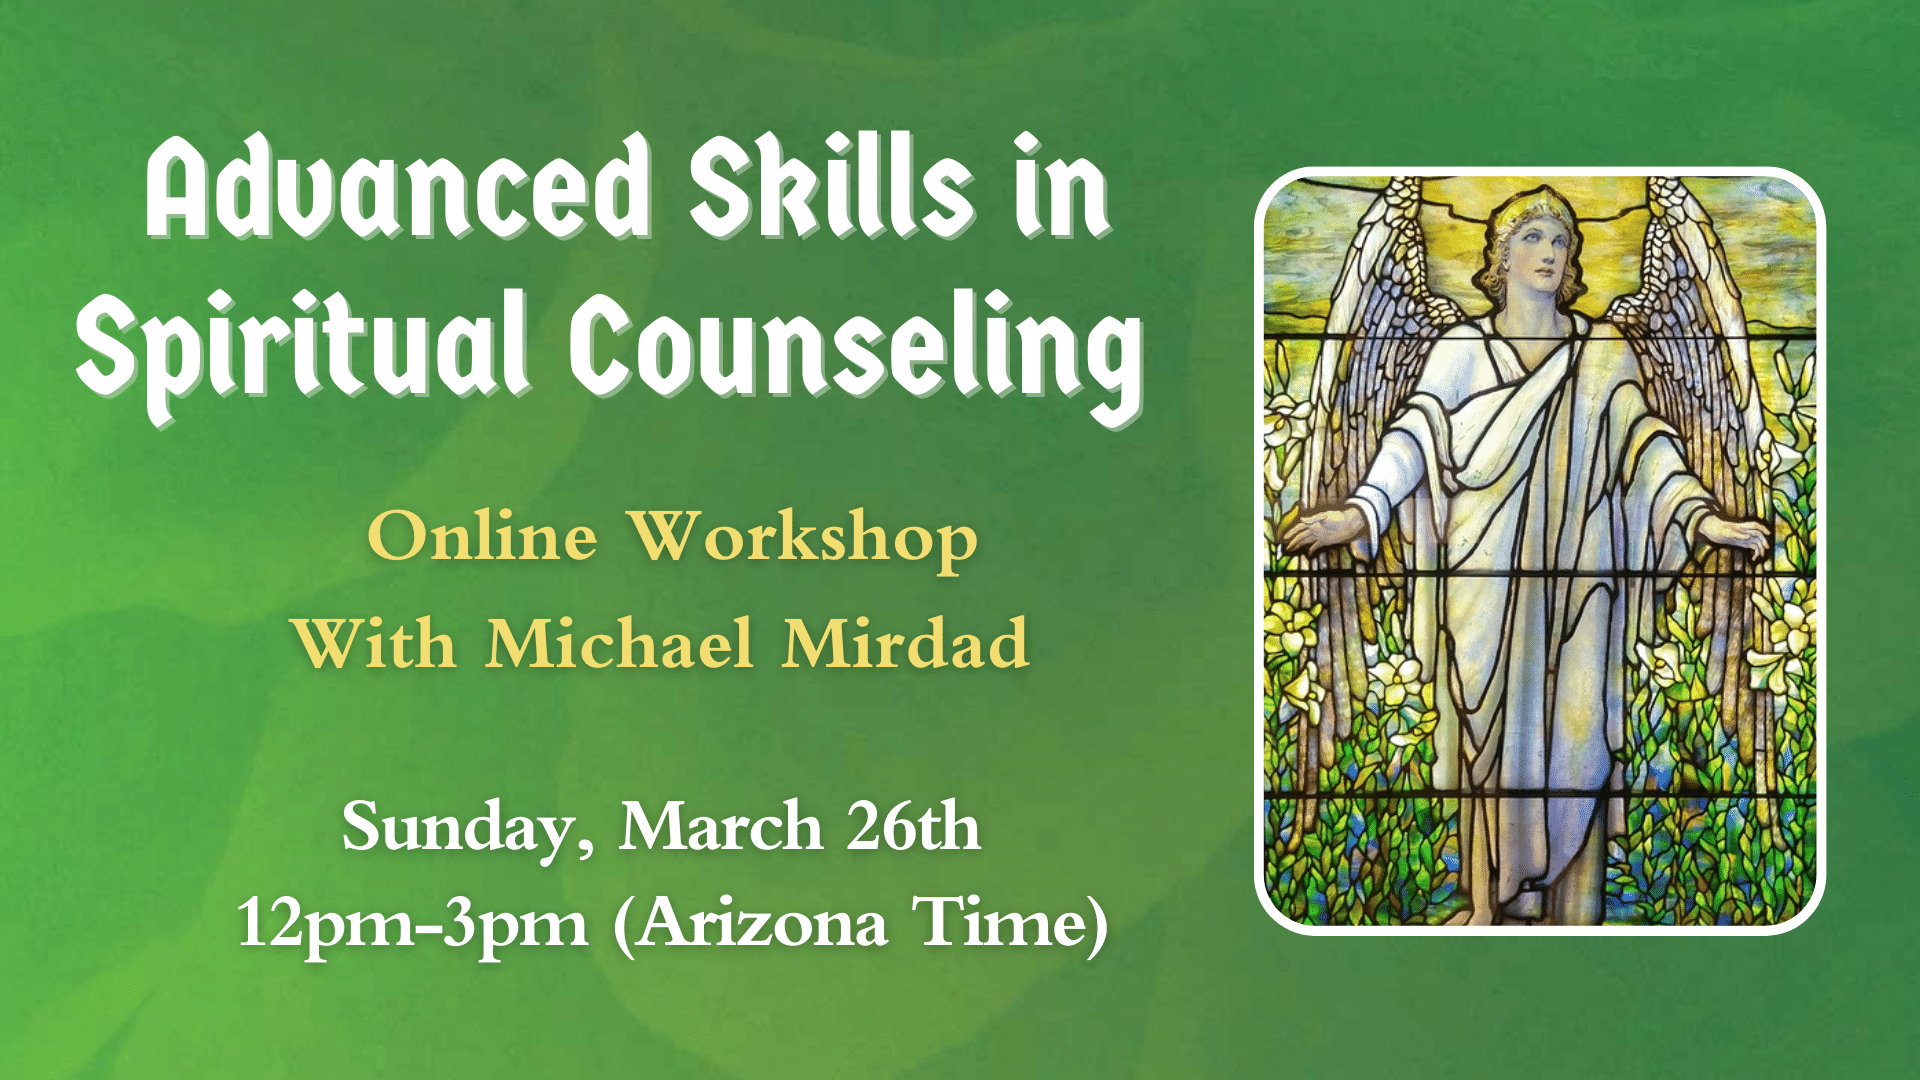 Advanced skills in spiritual counseling online workshop with Michael Mirdad, focusing on inner peace.